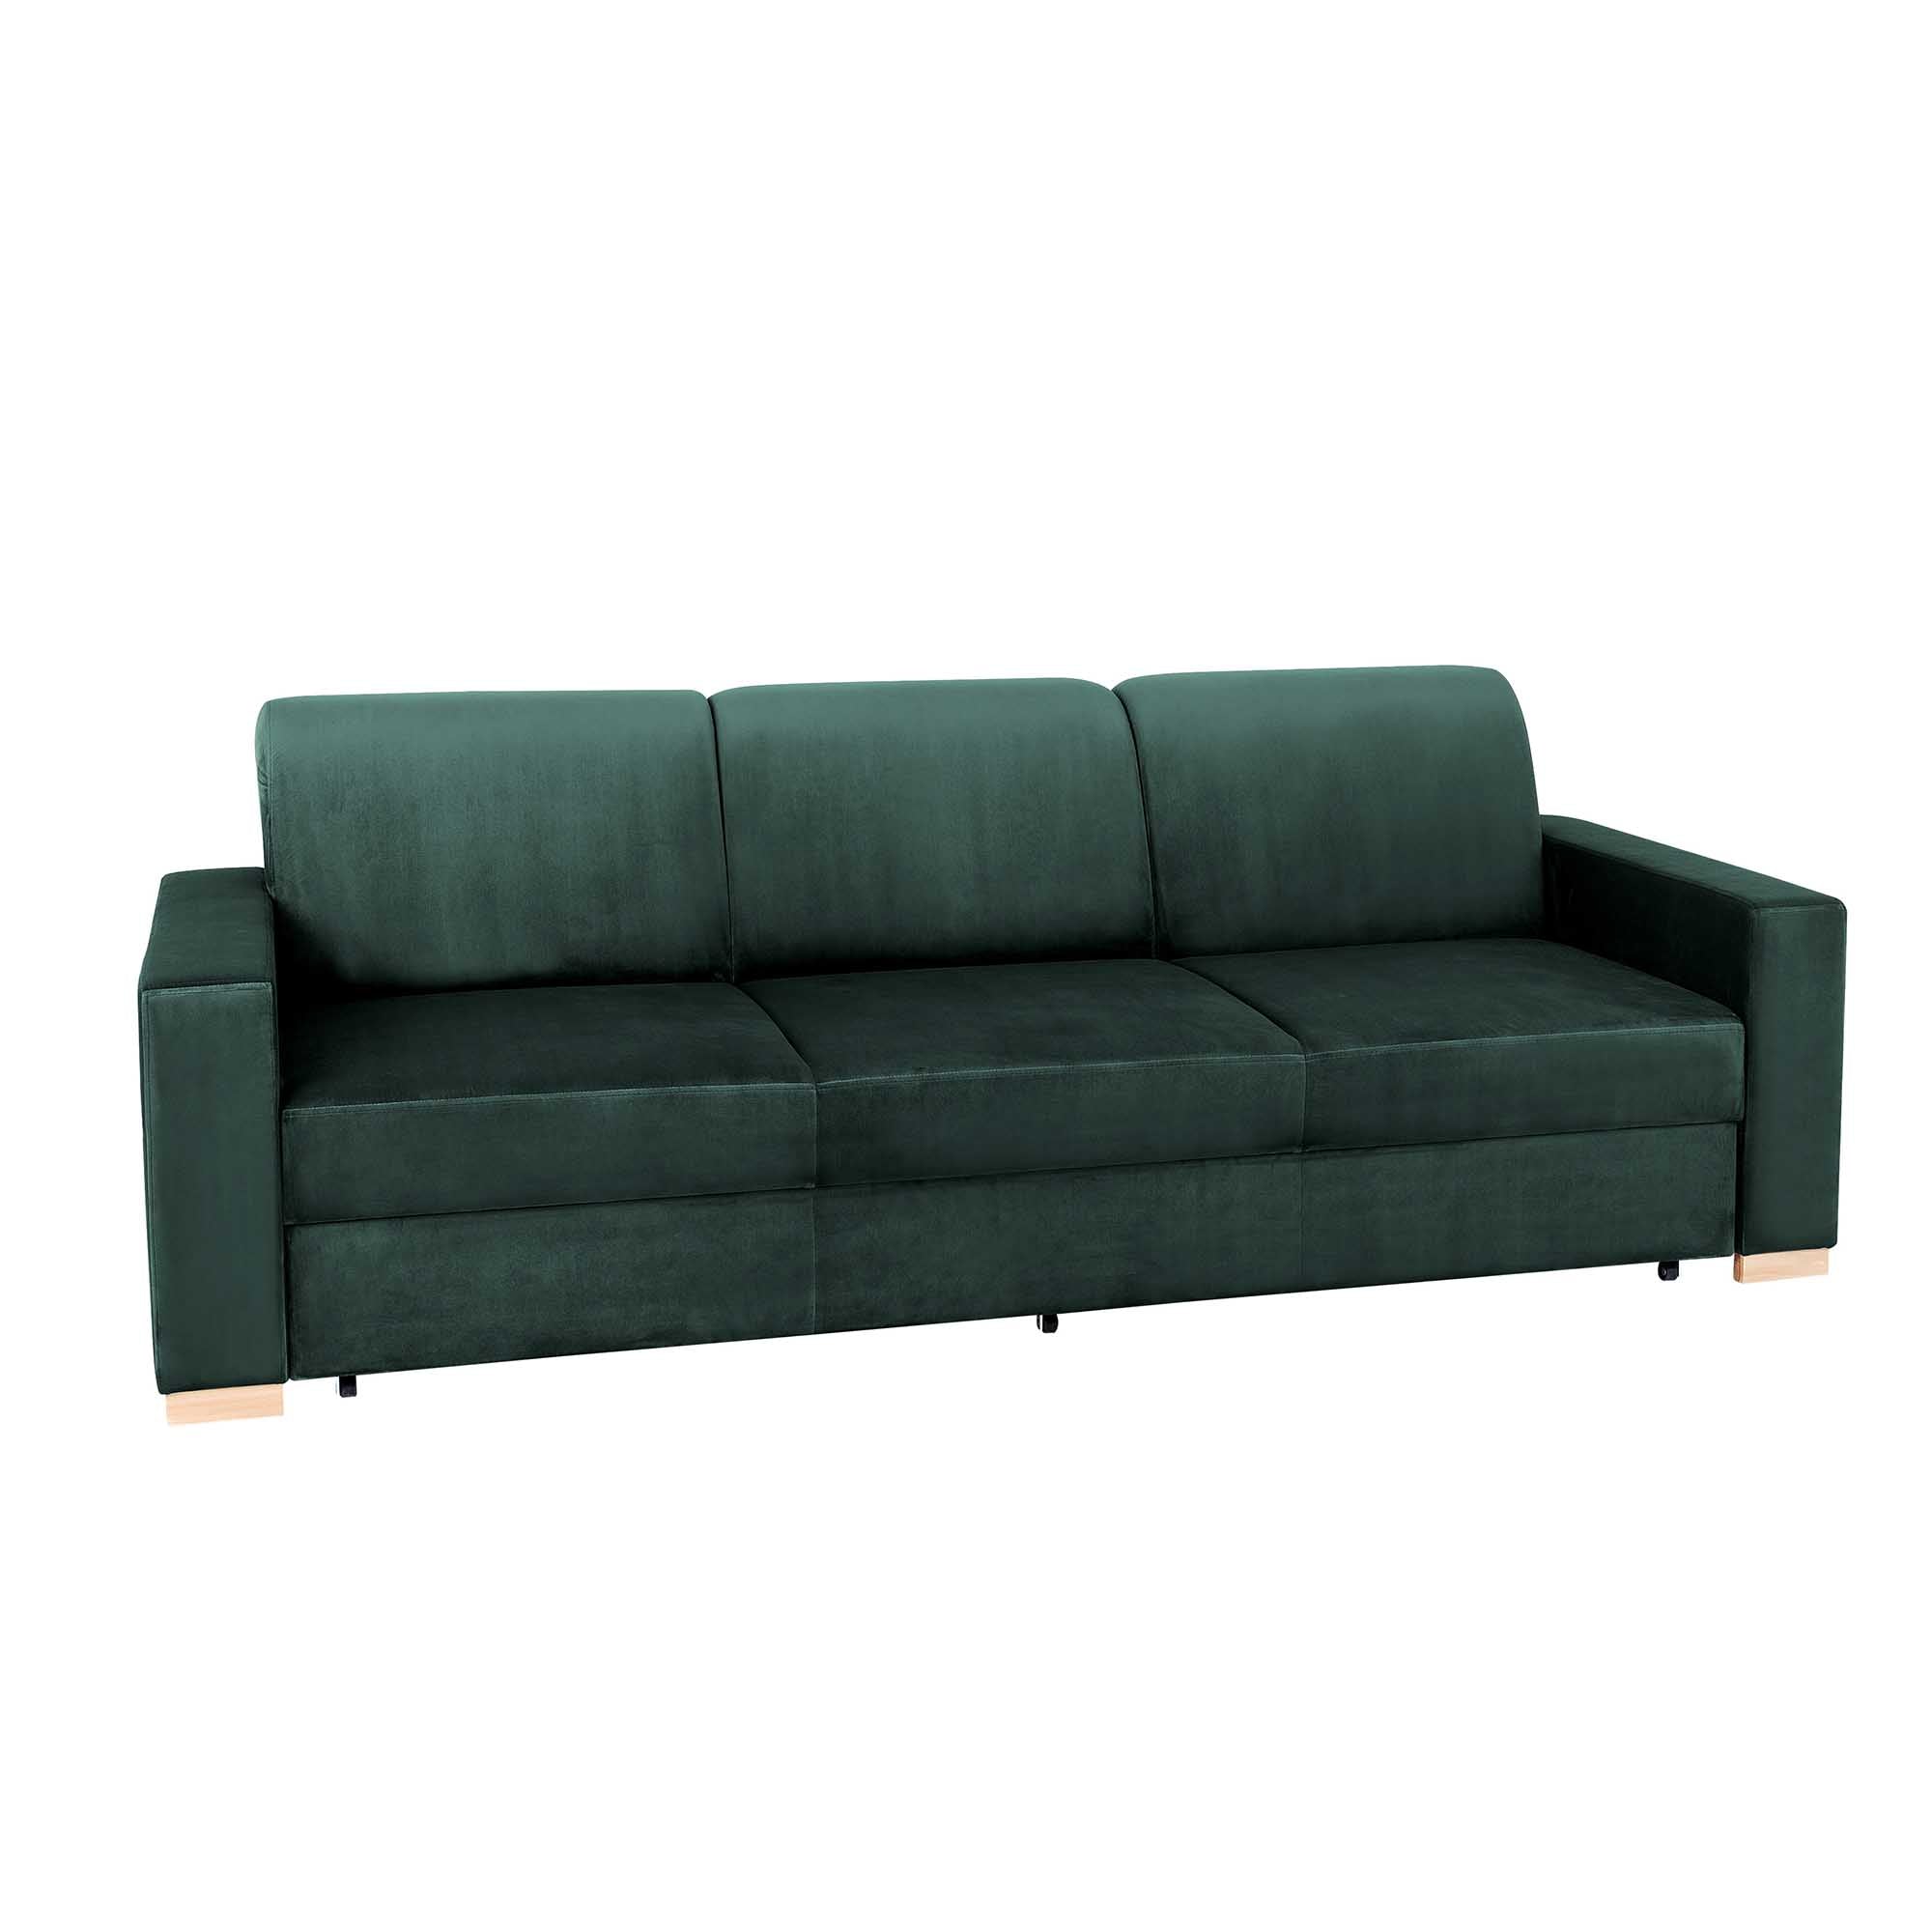 STABLE Sofa 3 Seaters upholstery colour avocado